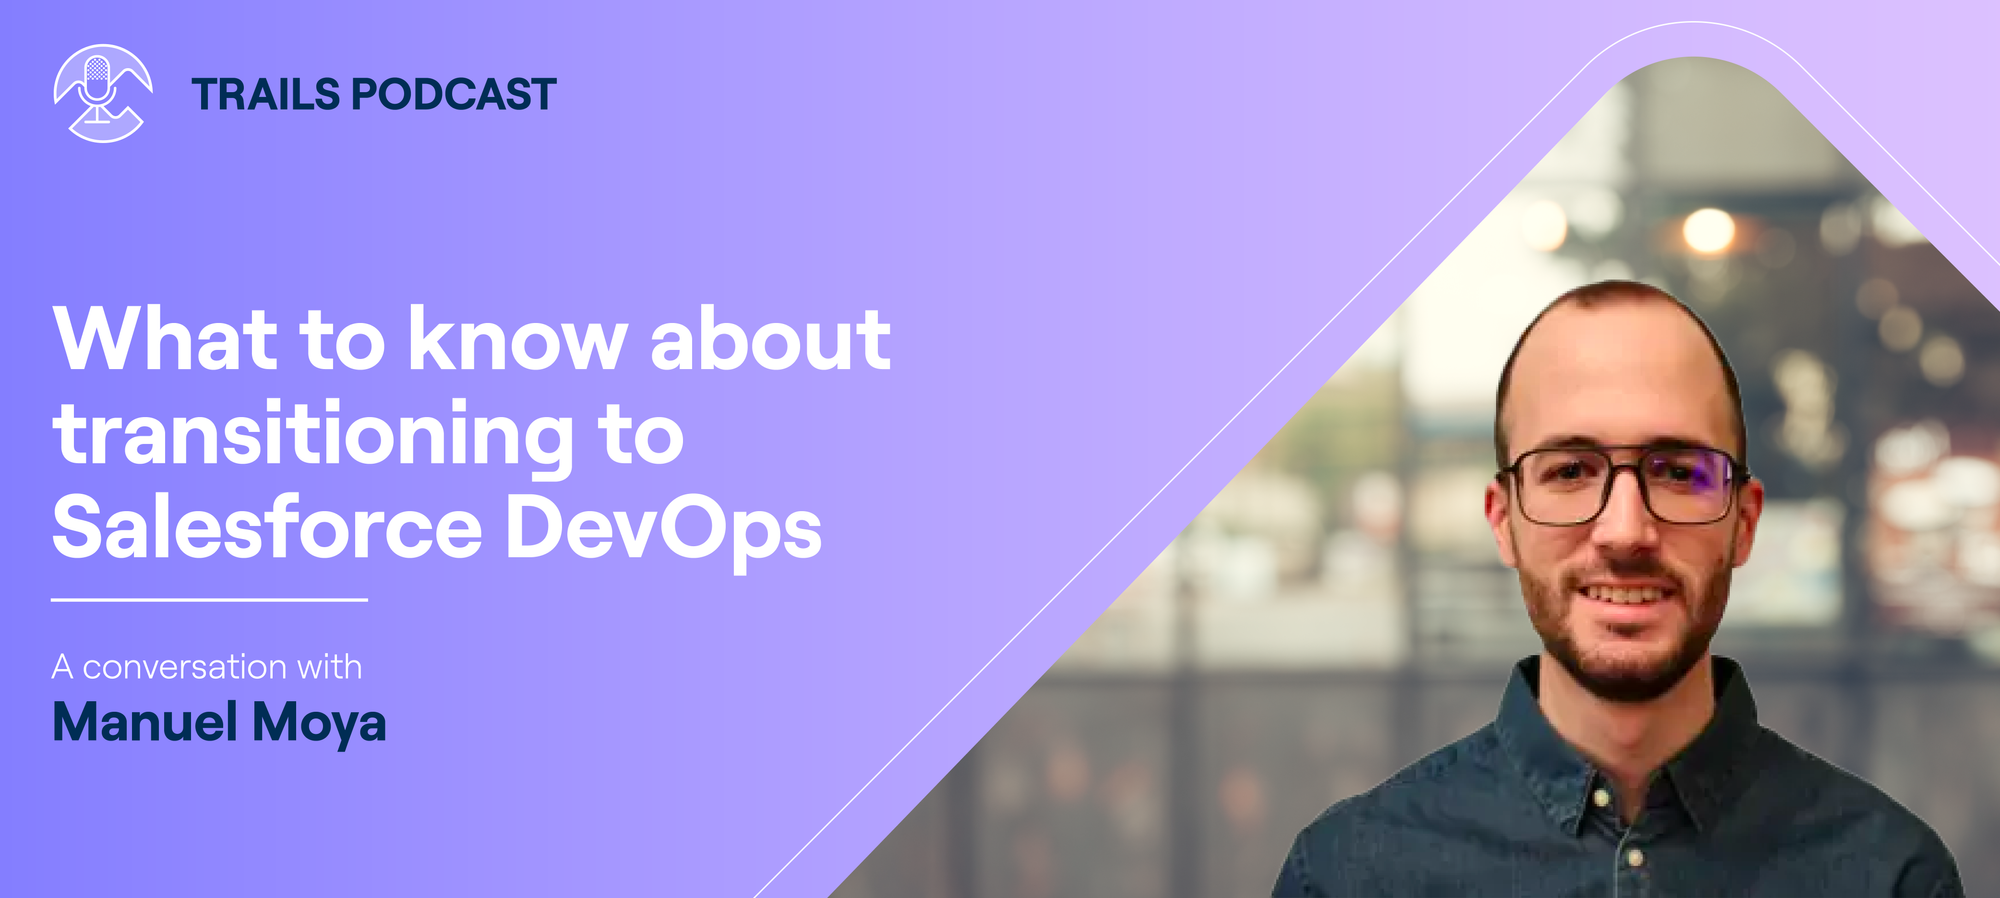 What to know about transitioning to Salesforce DevOps (Trails Podcast episode #14 with Manuel Moya)